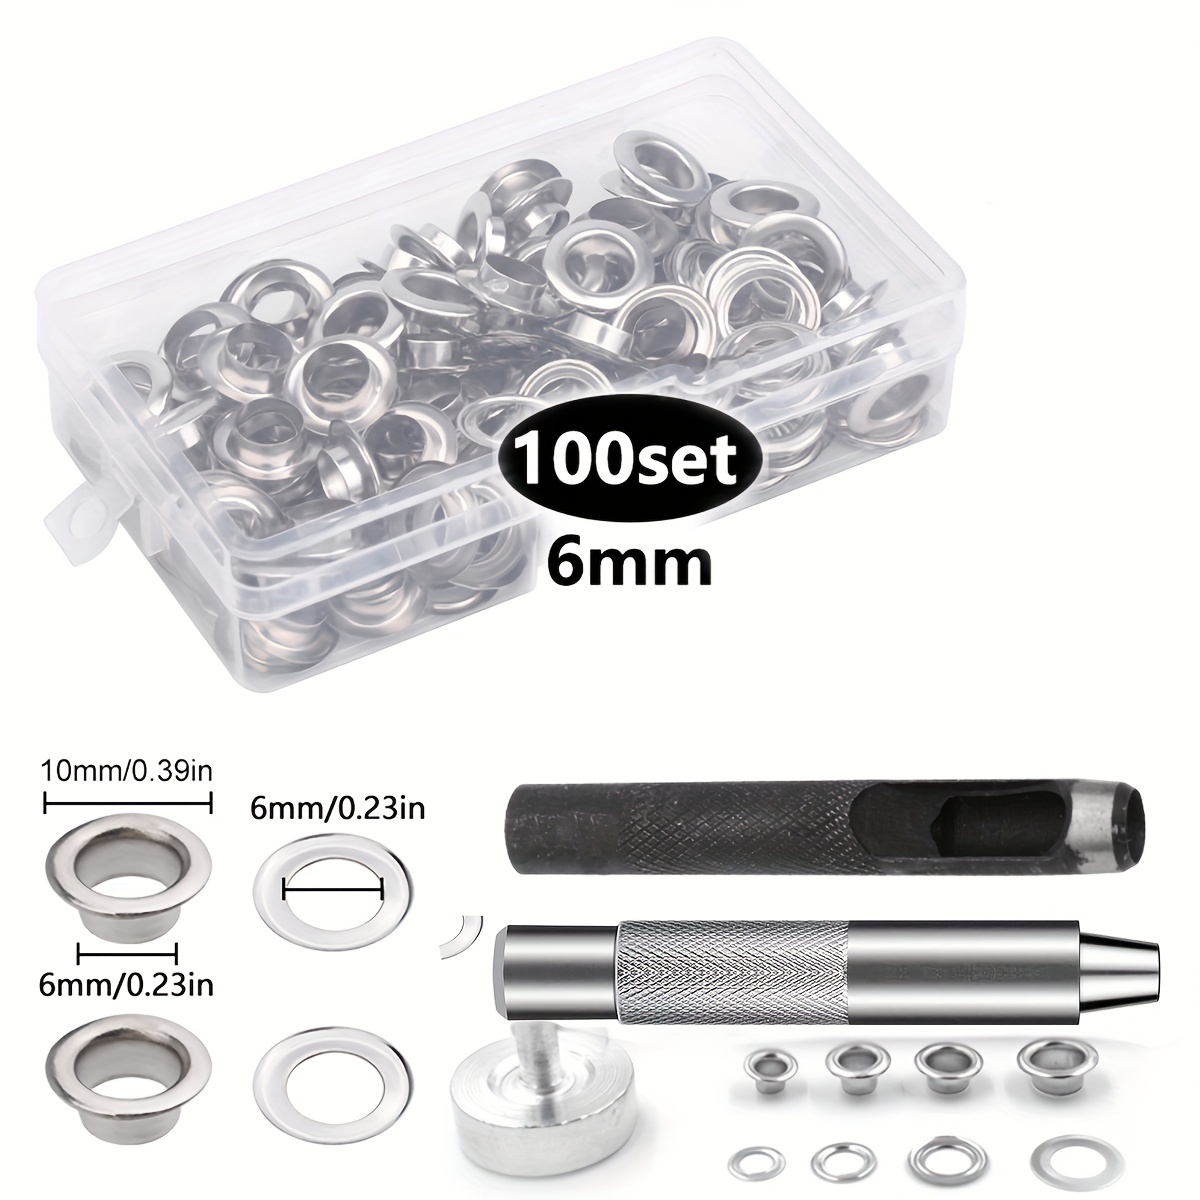 203 Sets Grommet Tool Kit 1/2 Inch, Grommet Eyelets Kit With Setting Tools  And Storage Box For Fabric, Tarps, Curtains